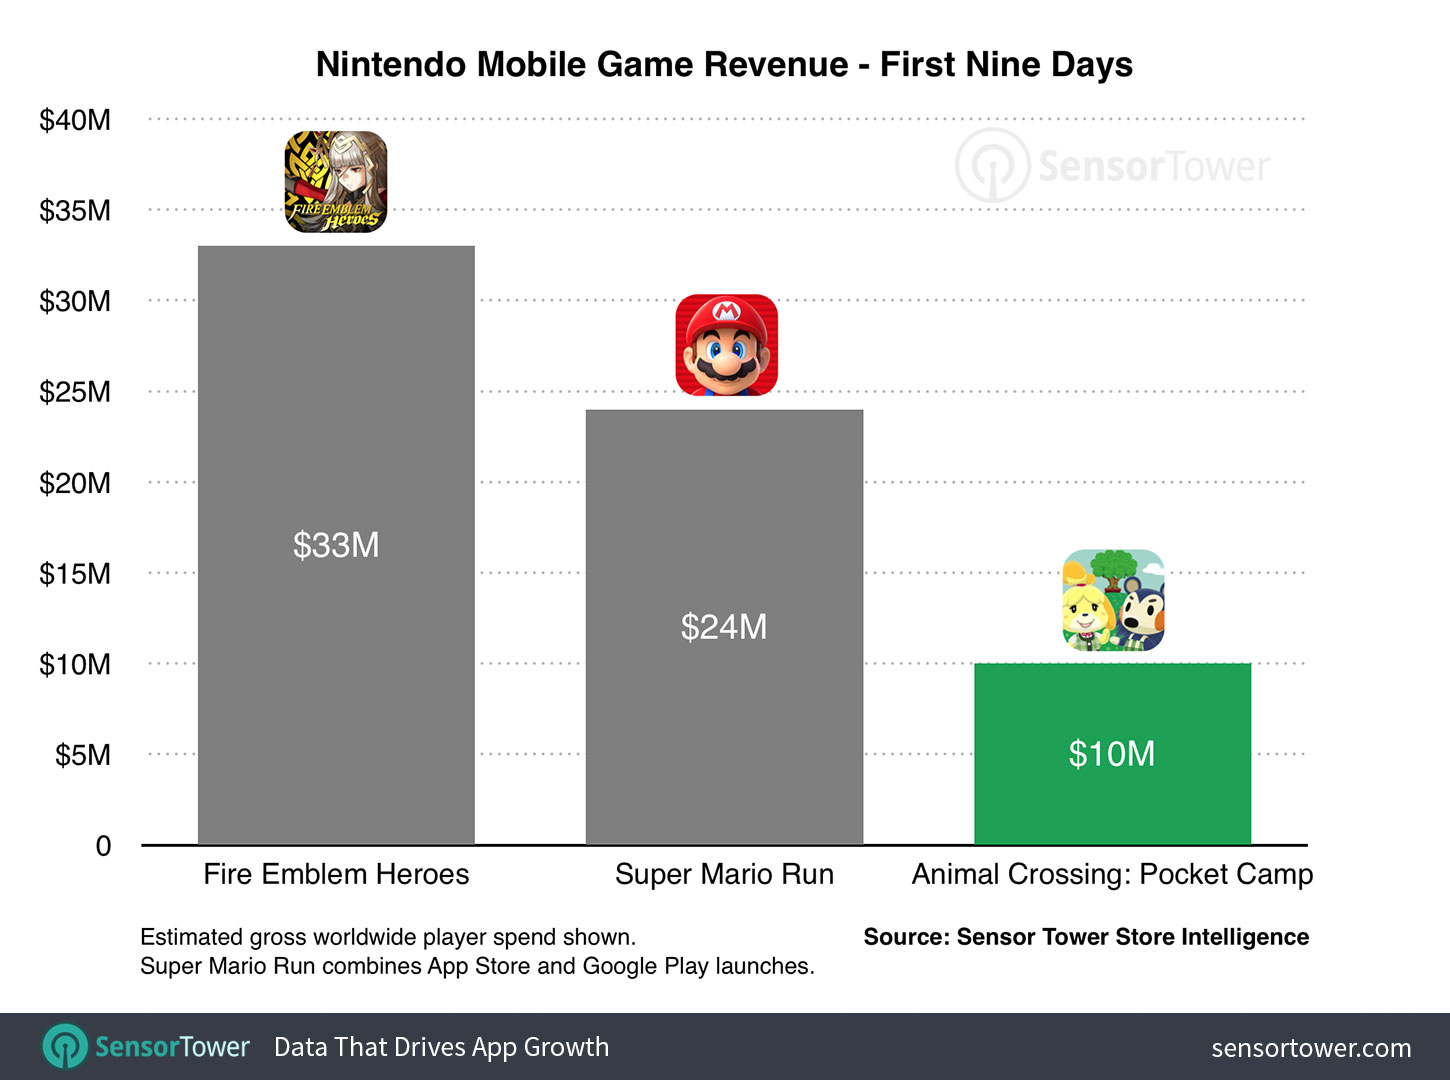 First nine days revenue of Animal Crossing: Pocket Camp compared to Super Mario Run and Fire Emblem Heroes